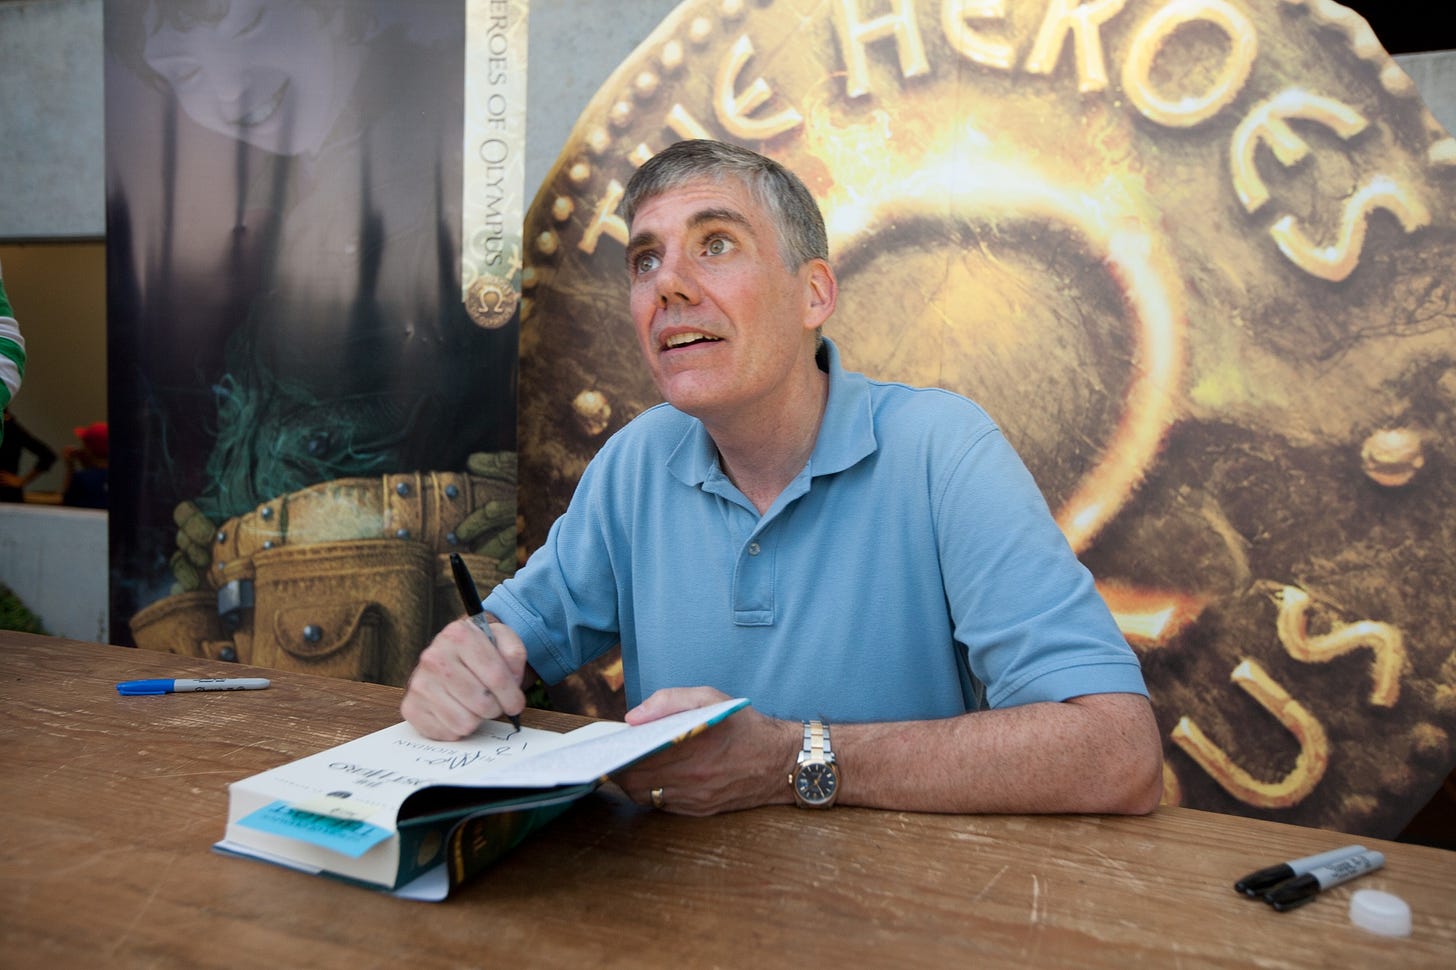 Percy Jackson&#39; Author Rick Riordan Says They&#39;re 1 Step Away From a Disney+  Series